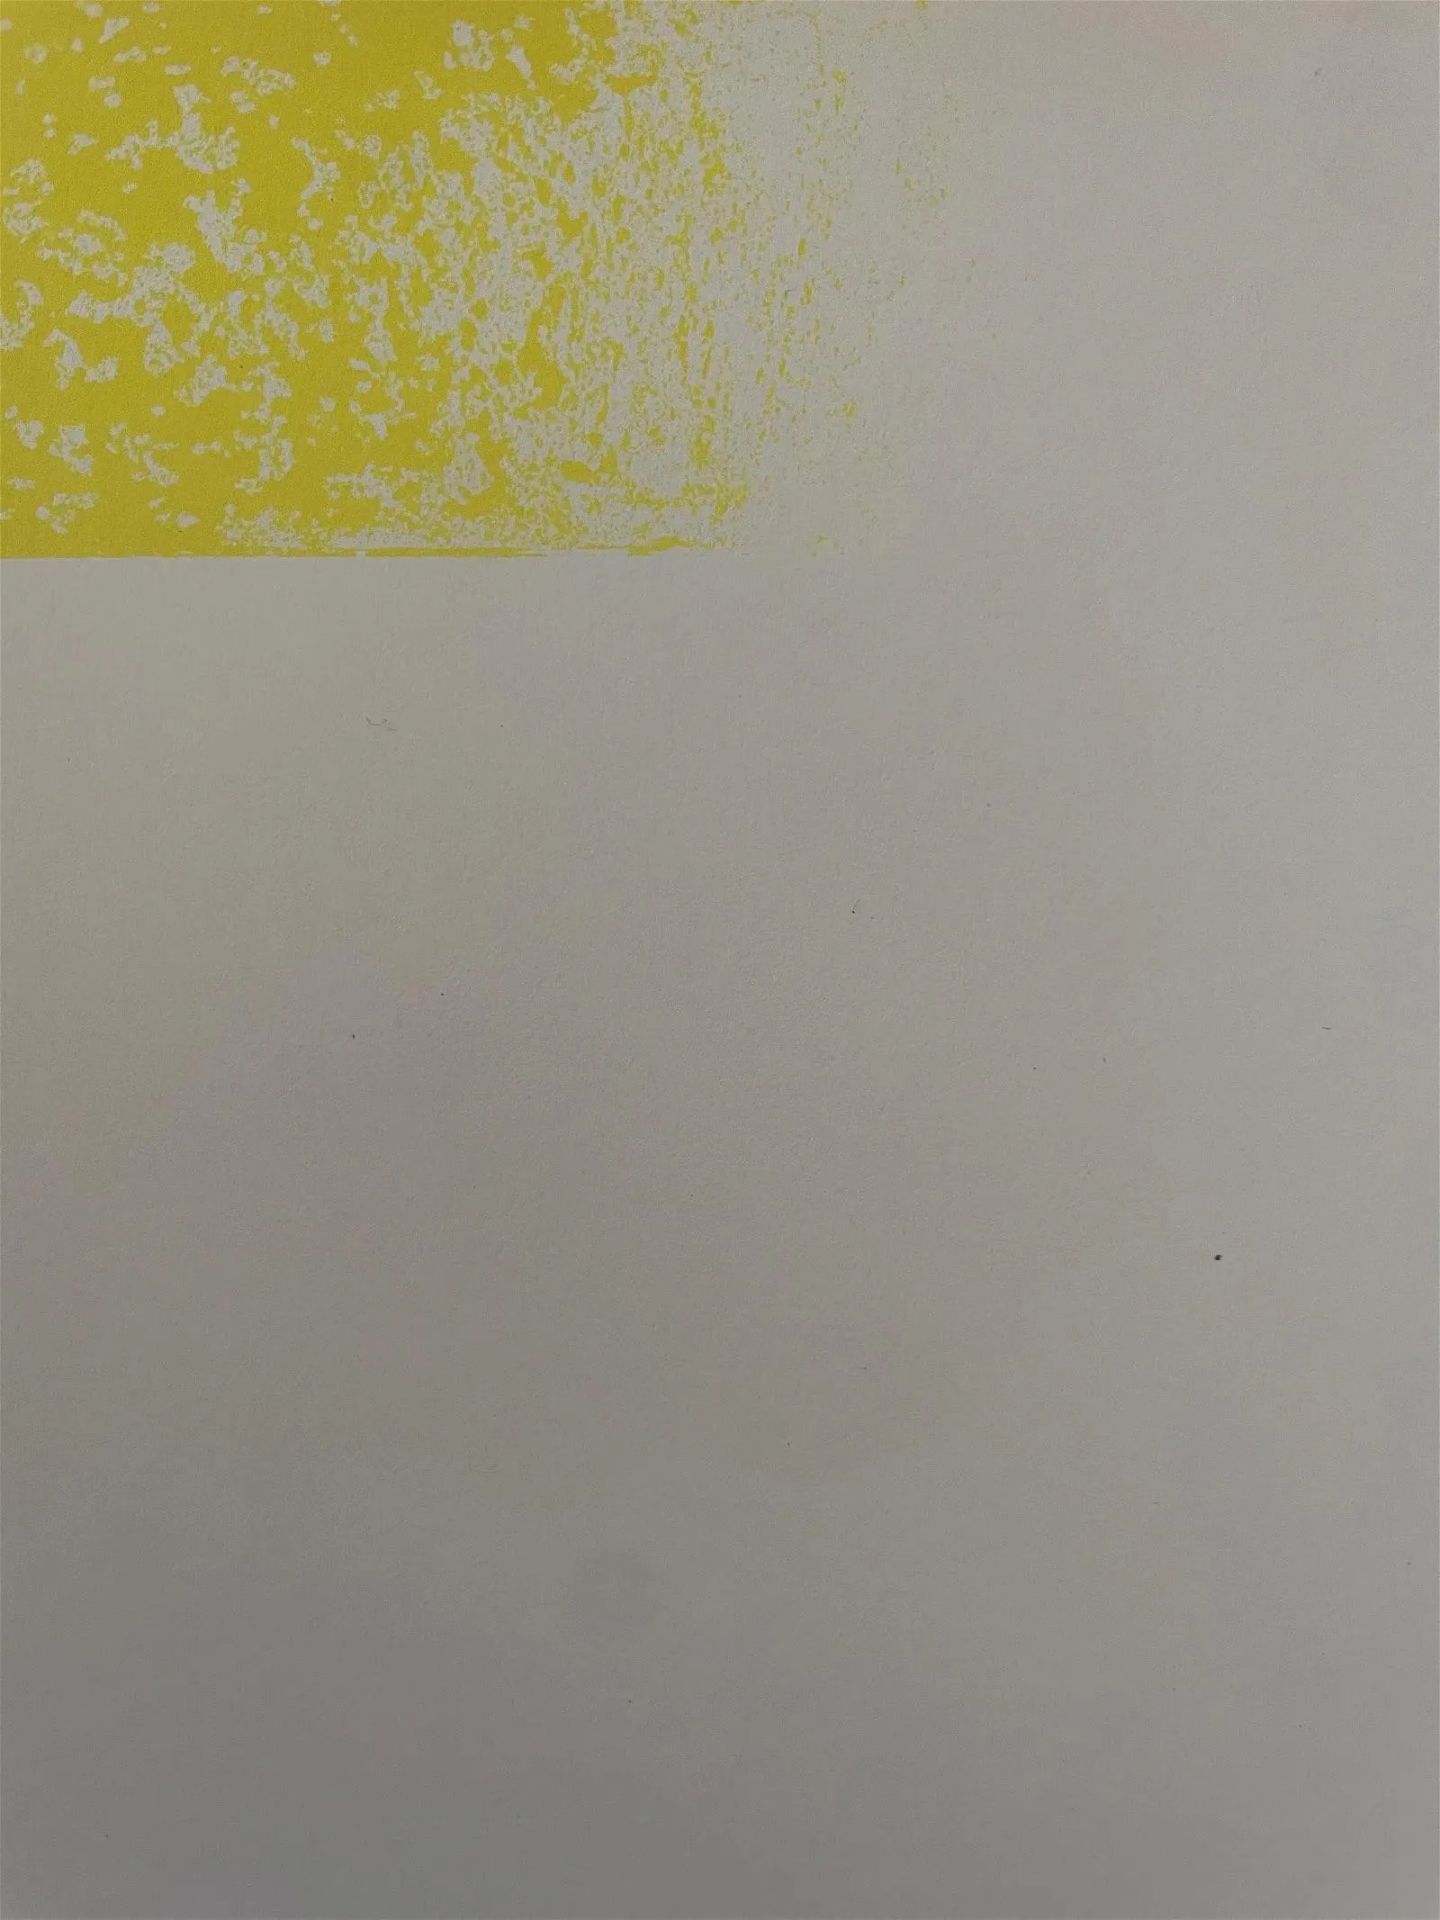 Richard Anuszkiewicz "Yellow Reversed, 1970" Offset Lithograph, Plate Signed, Dated - Image 5 of 6